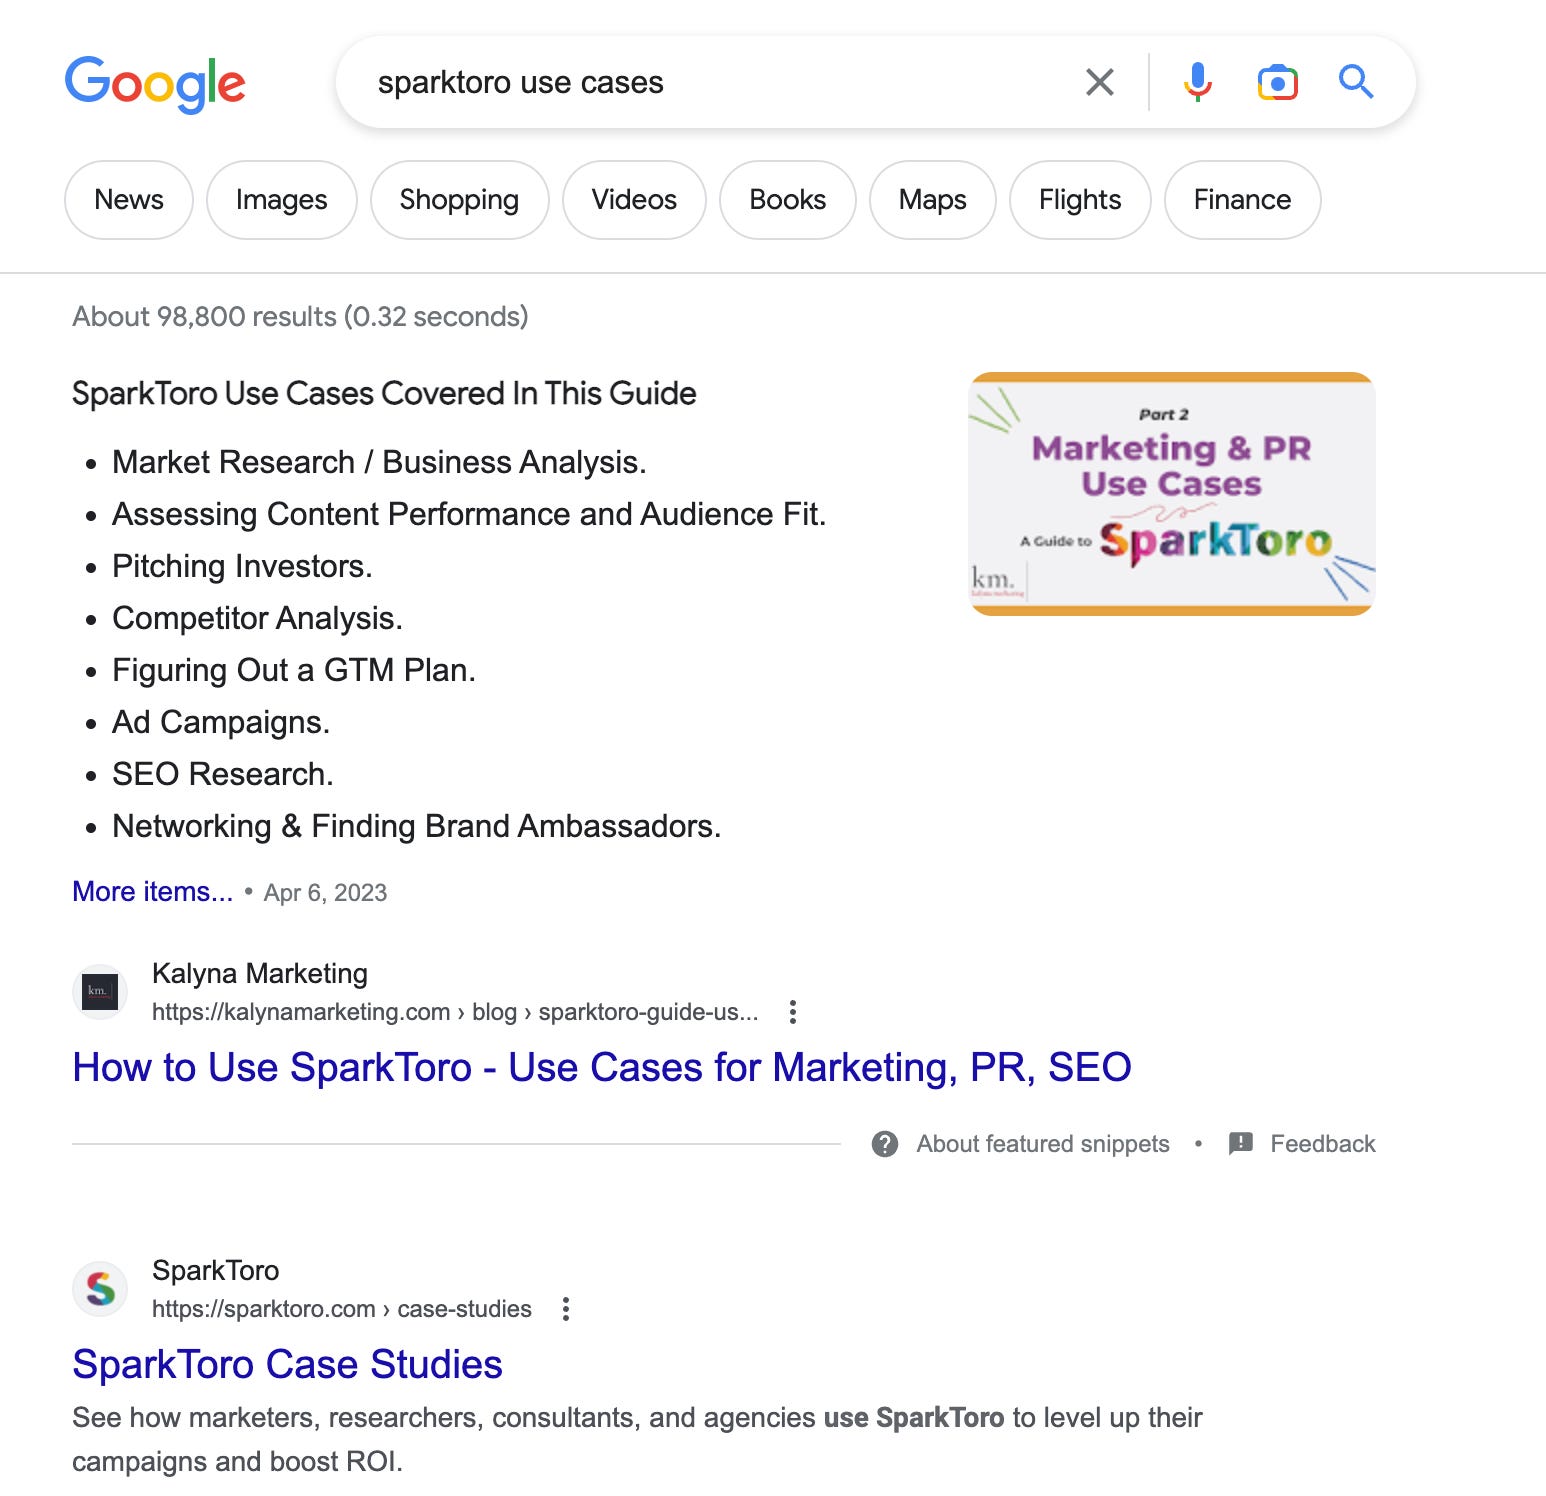 A screenshot of Google search results for "SparkToro use cases" showing the top result as a snippet from Kalyna Marketing, a post called "How to Use SparkToro"